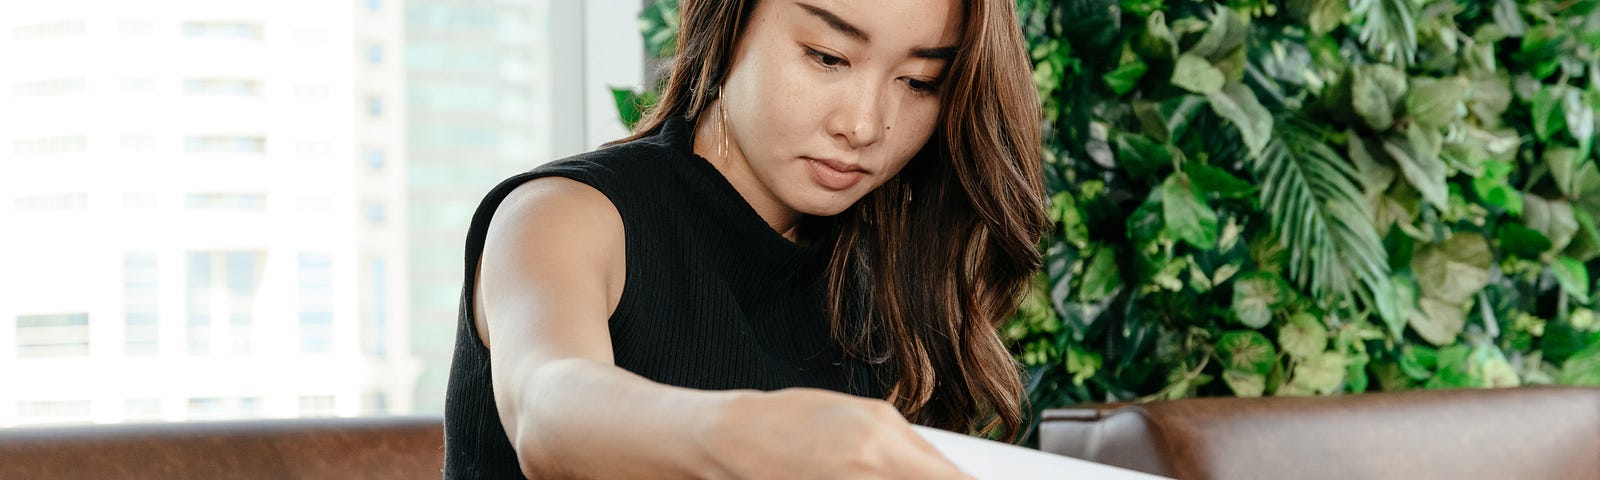 A woman wearing a black blouse and brown skirt is sitting on a brown leather couch in front of a window and a large plant with green foliage. She is looking through paperwork.